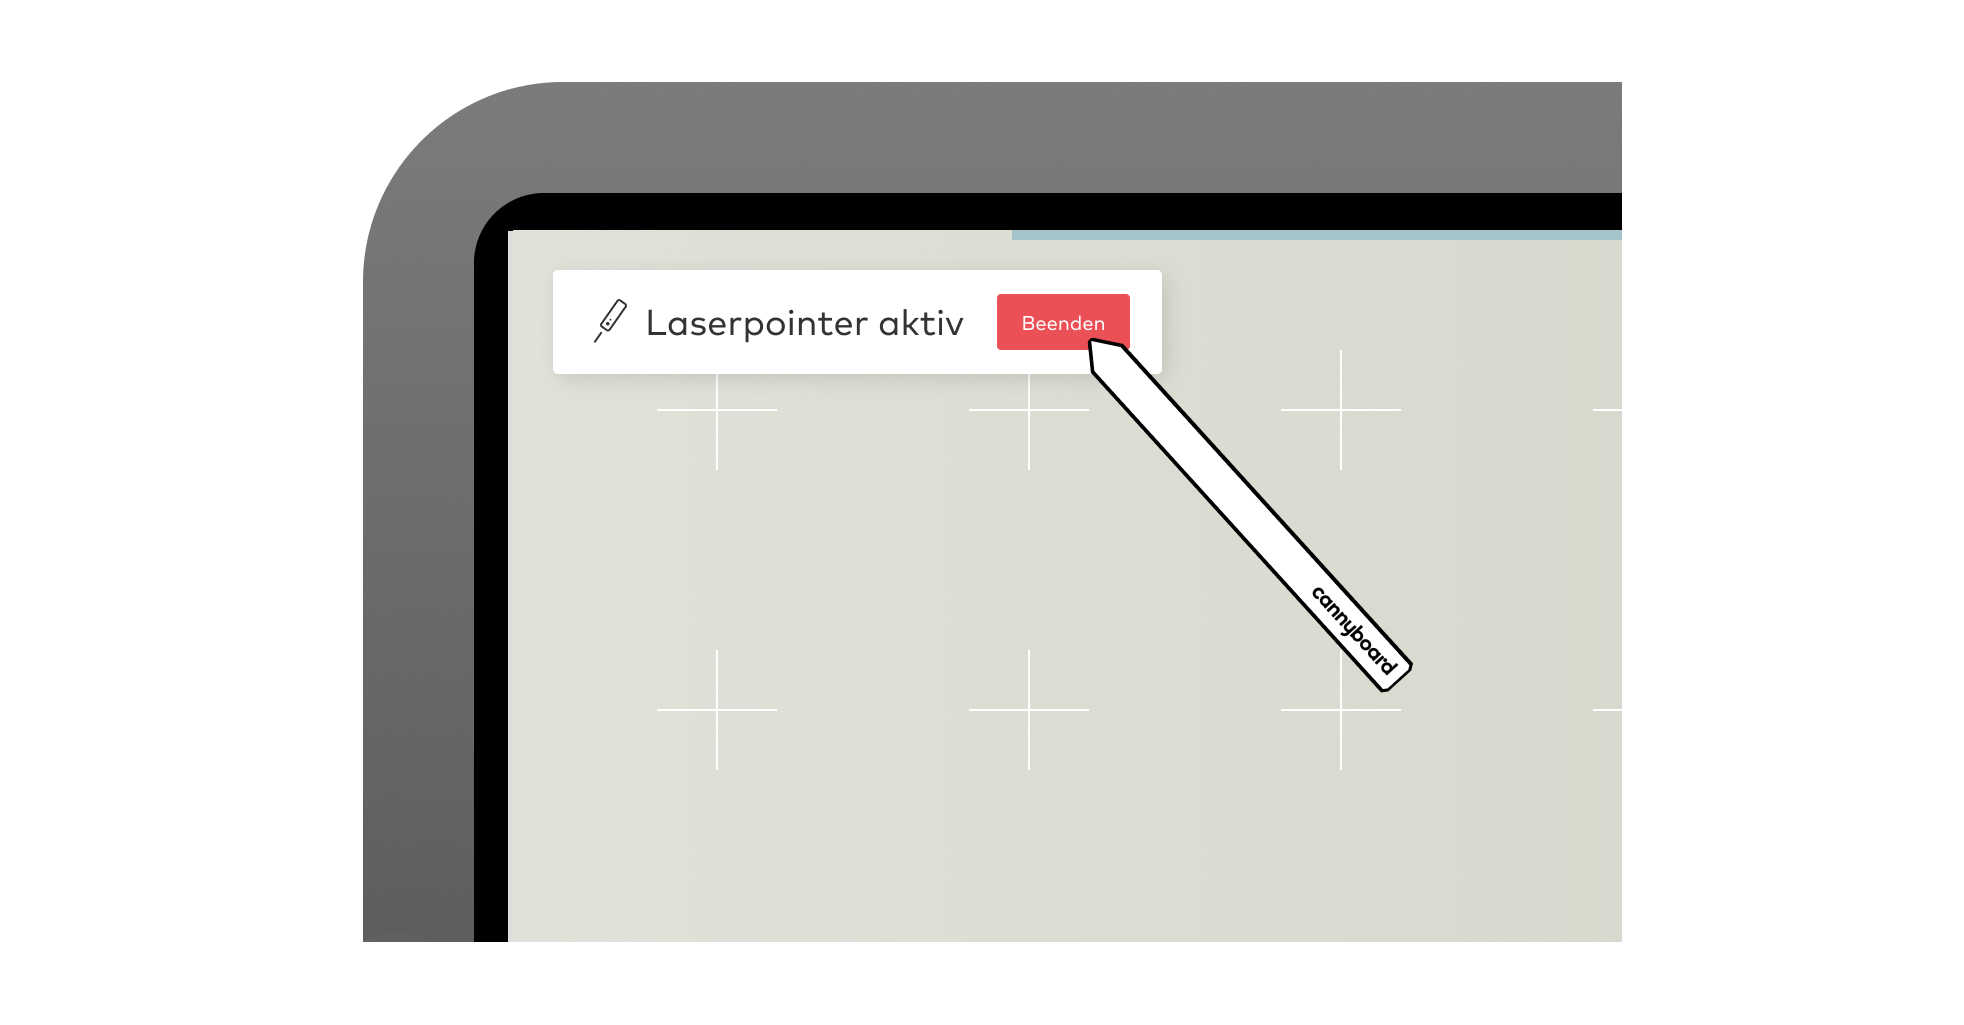 cannyboard_end-laserpointer-de.png